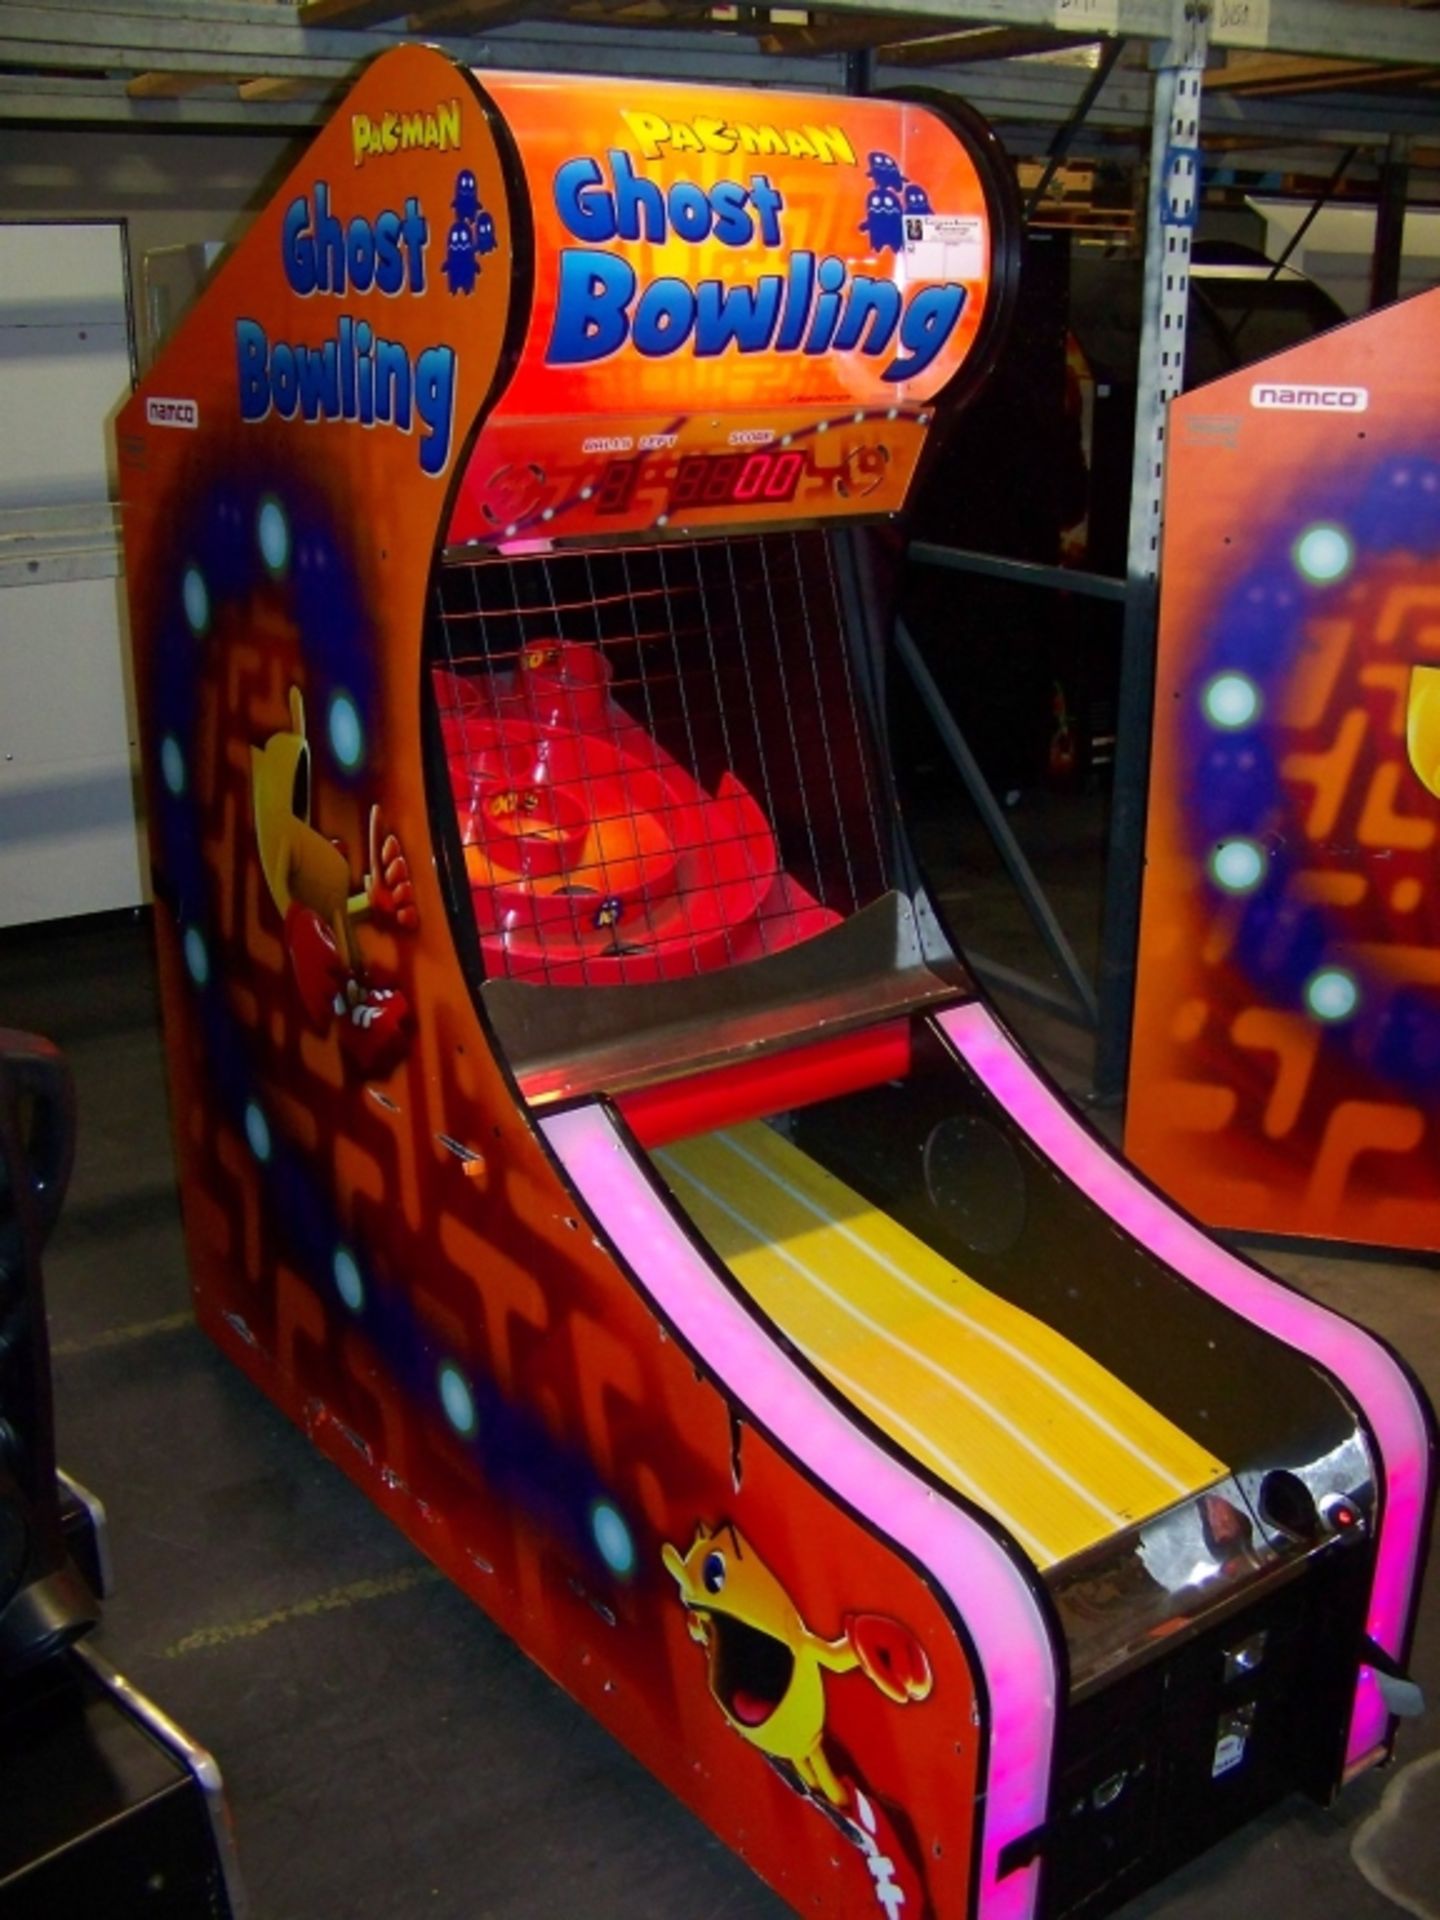 PACMAN GHOST BOWLING REDEMPTION GAME NAMCO